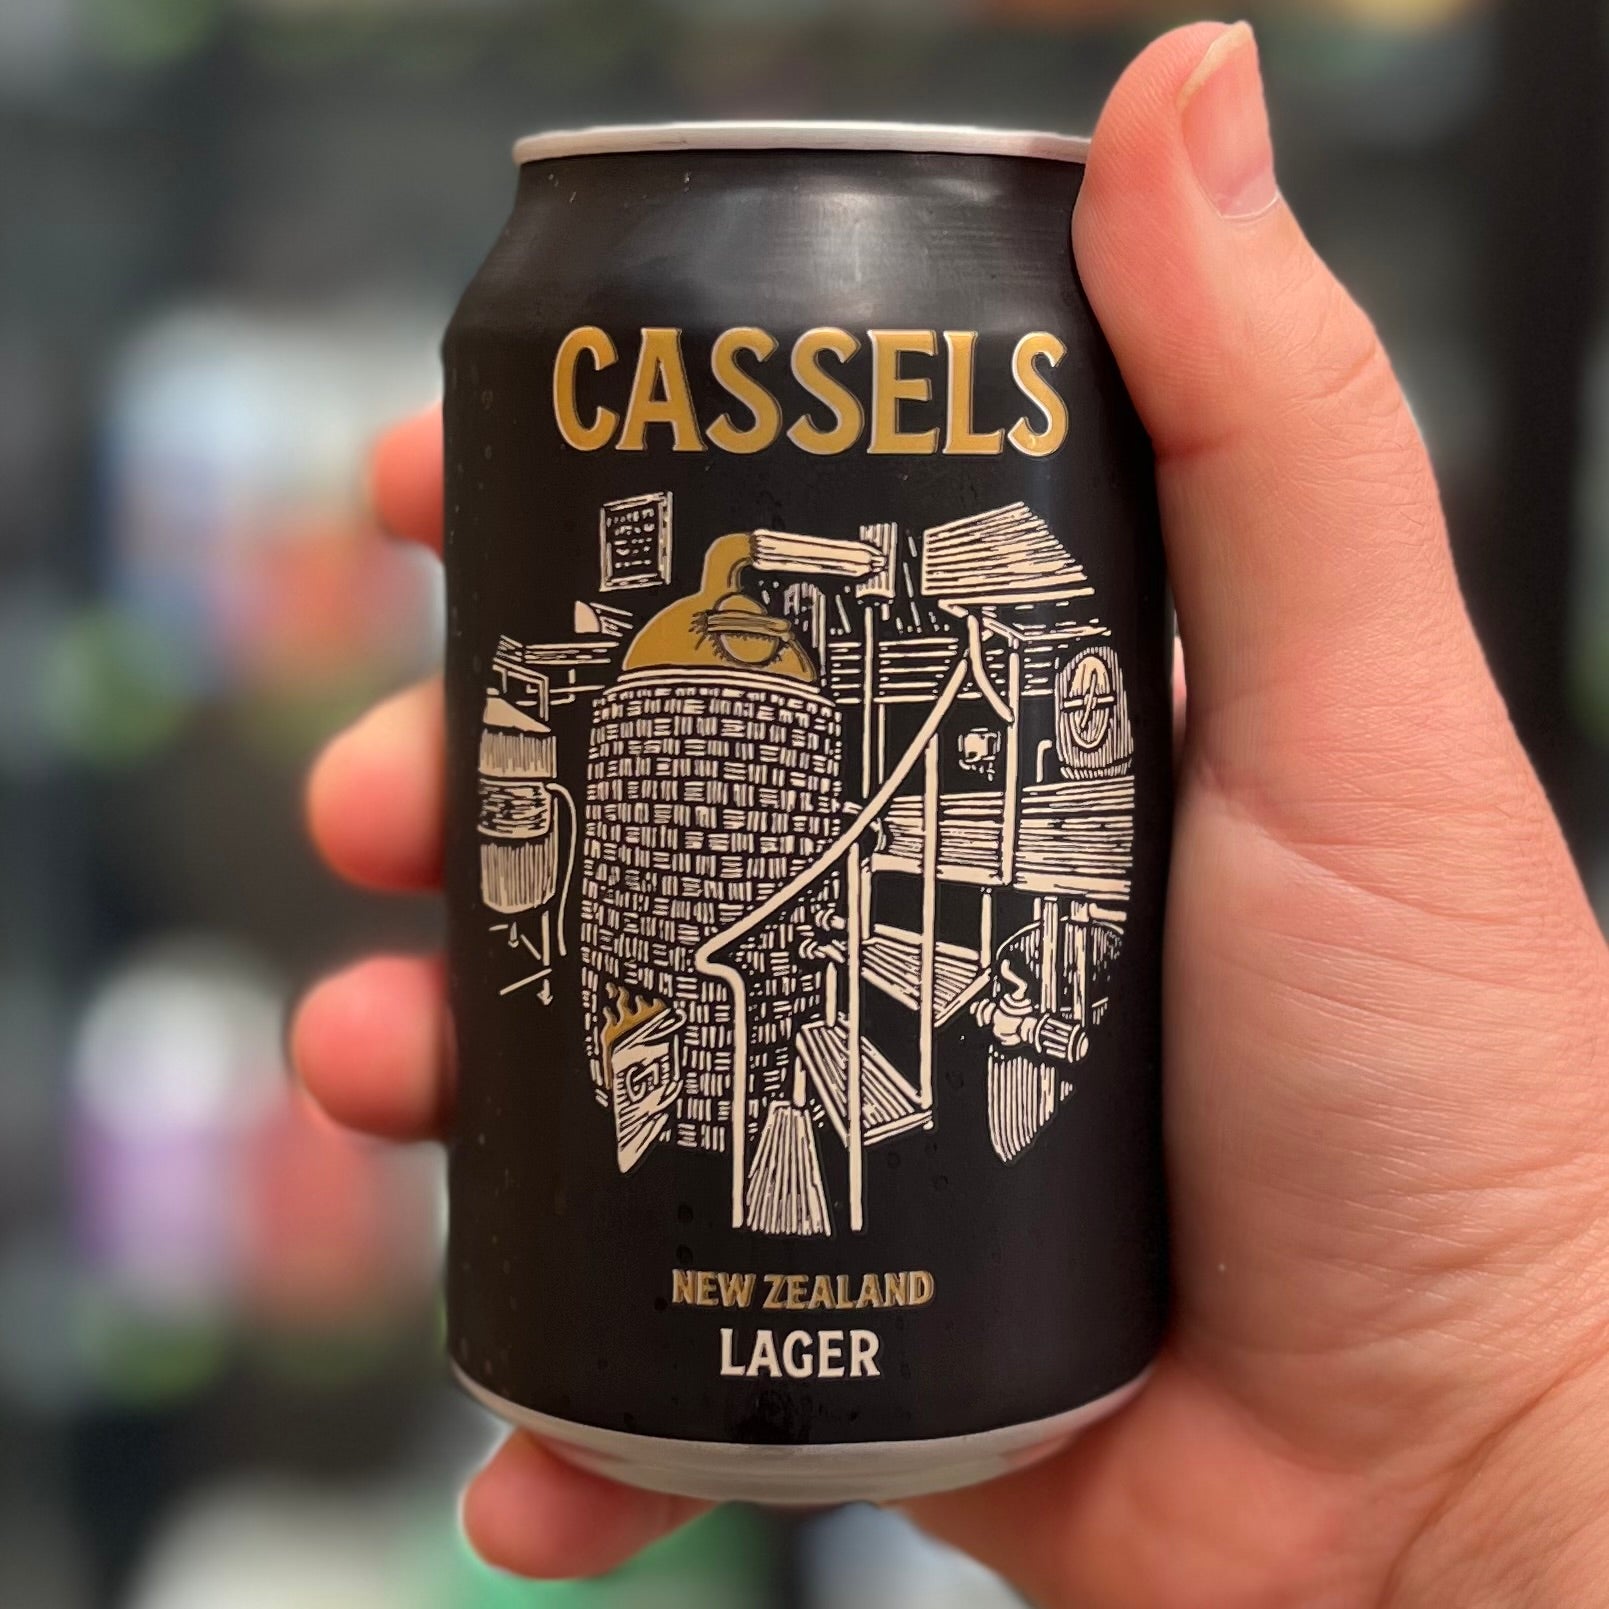 Cassels Lager